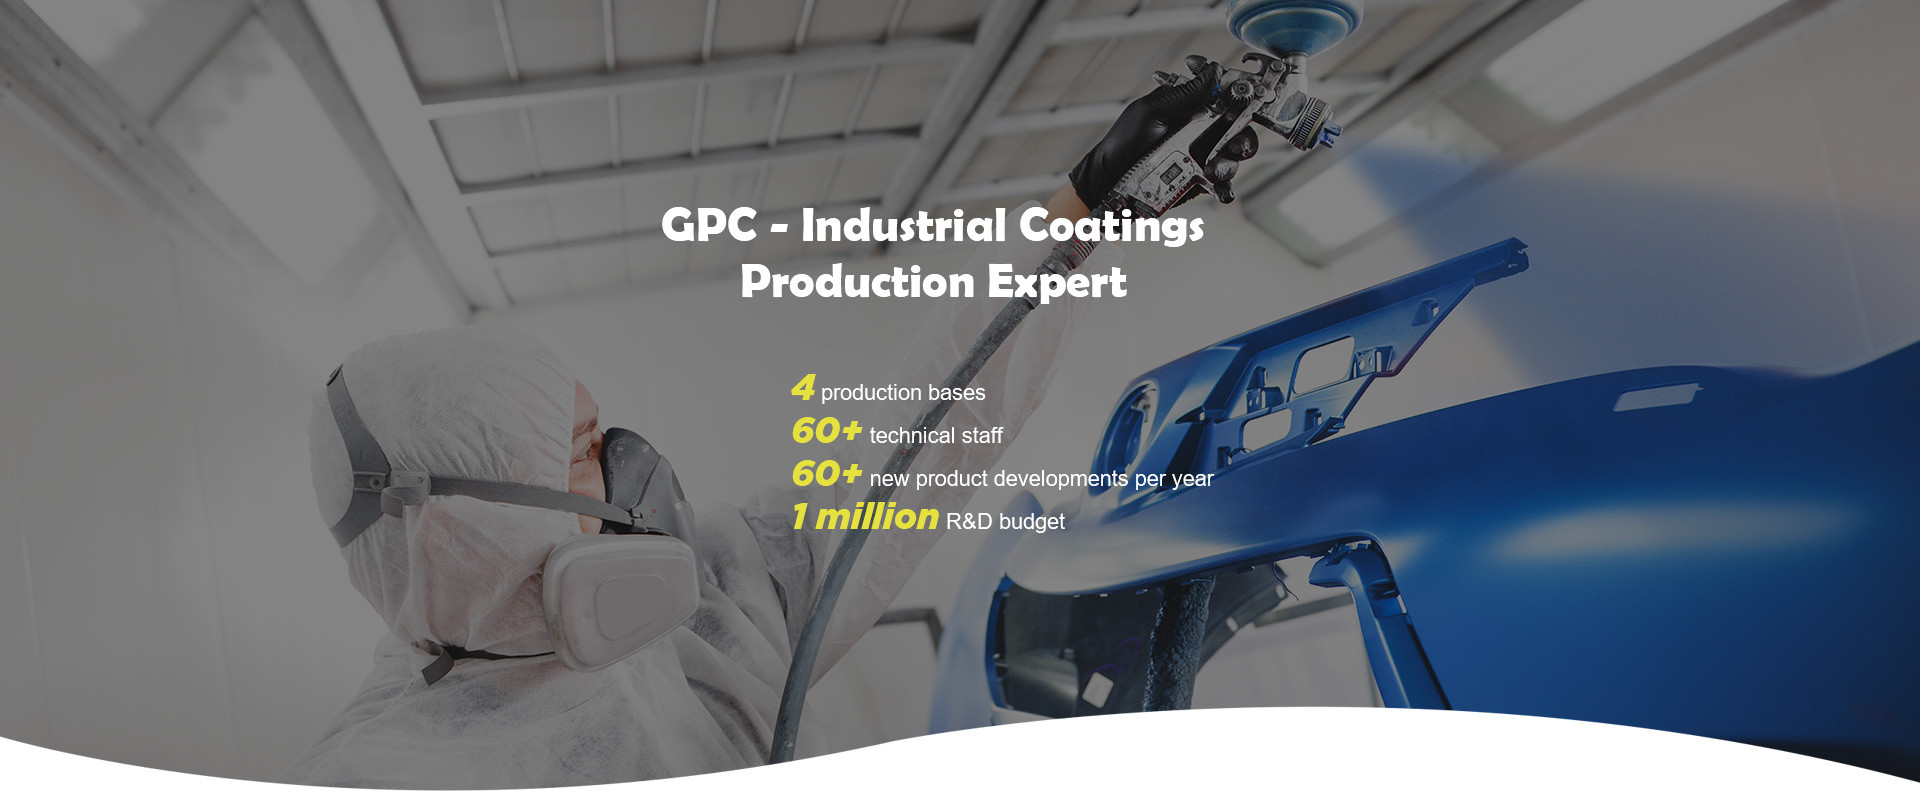 GPC - Industrial Coatings Production Expert